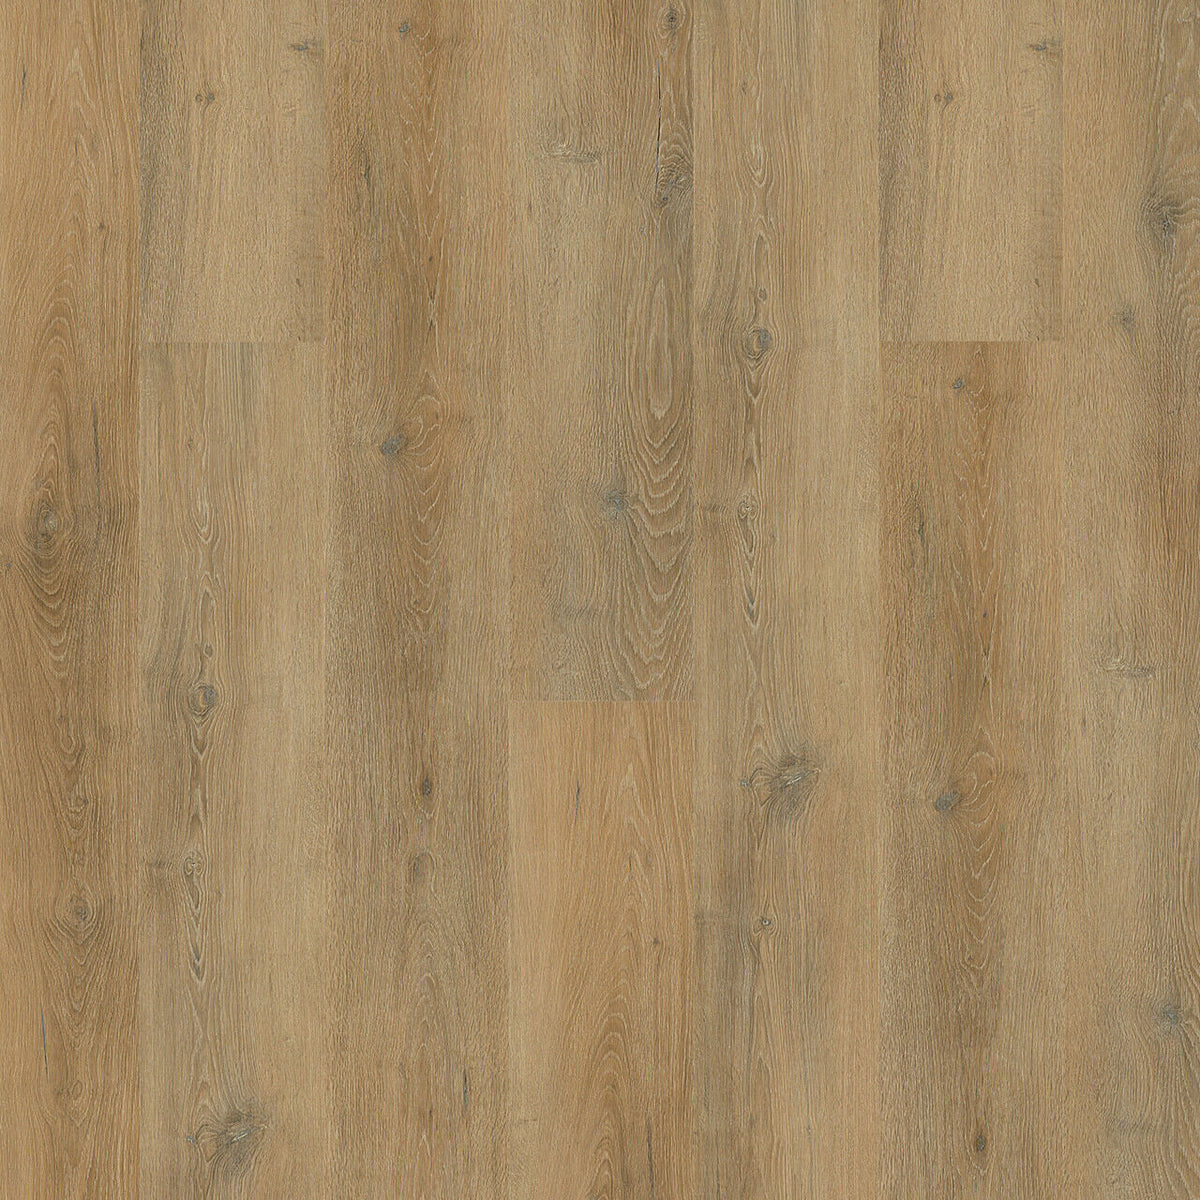 Engineered Floors - Triumph Collection - New Standard Plus - 7 in. x 48 in. - Easter Island